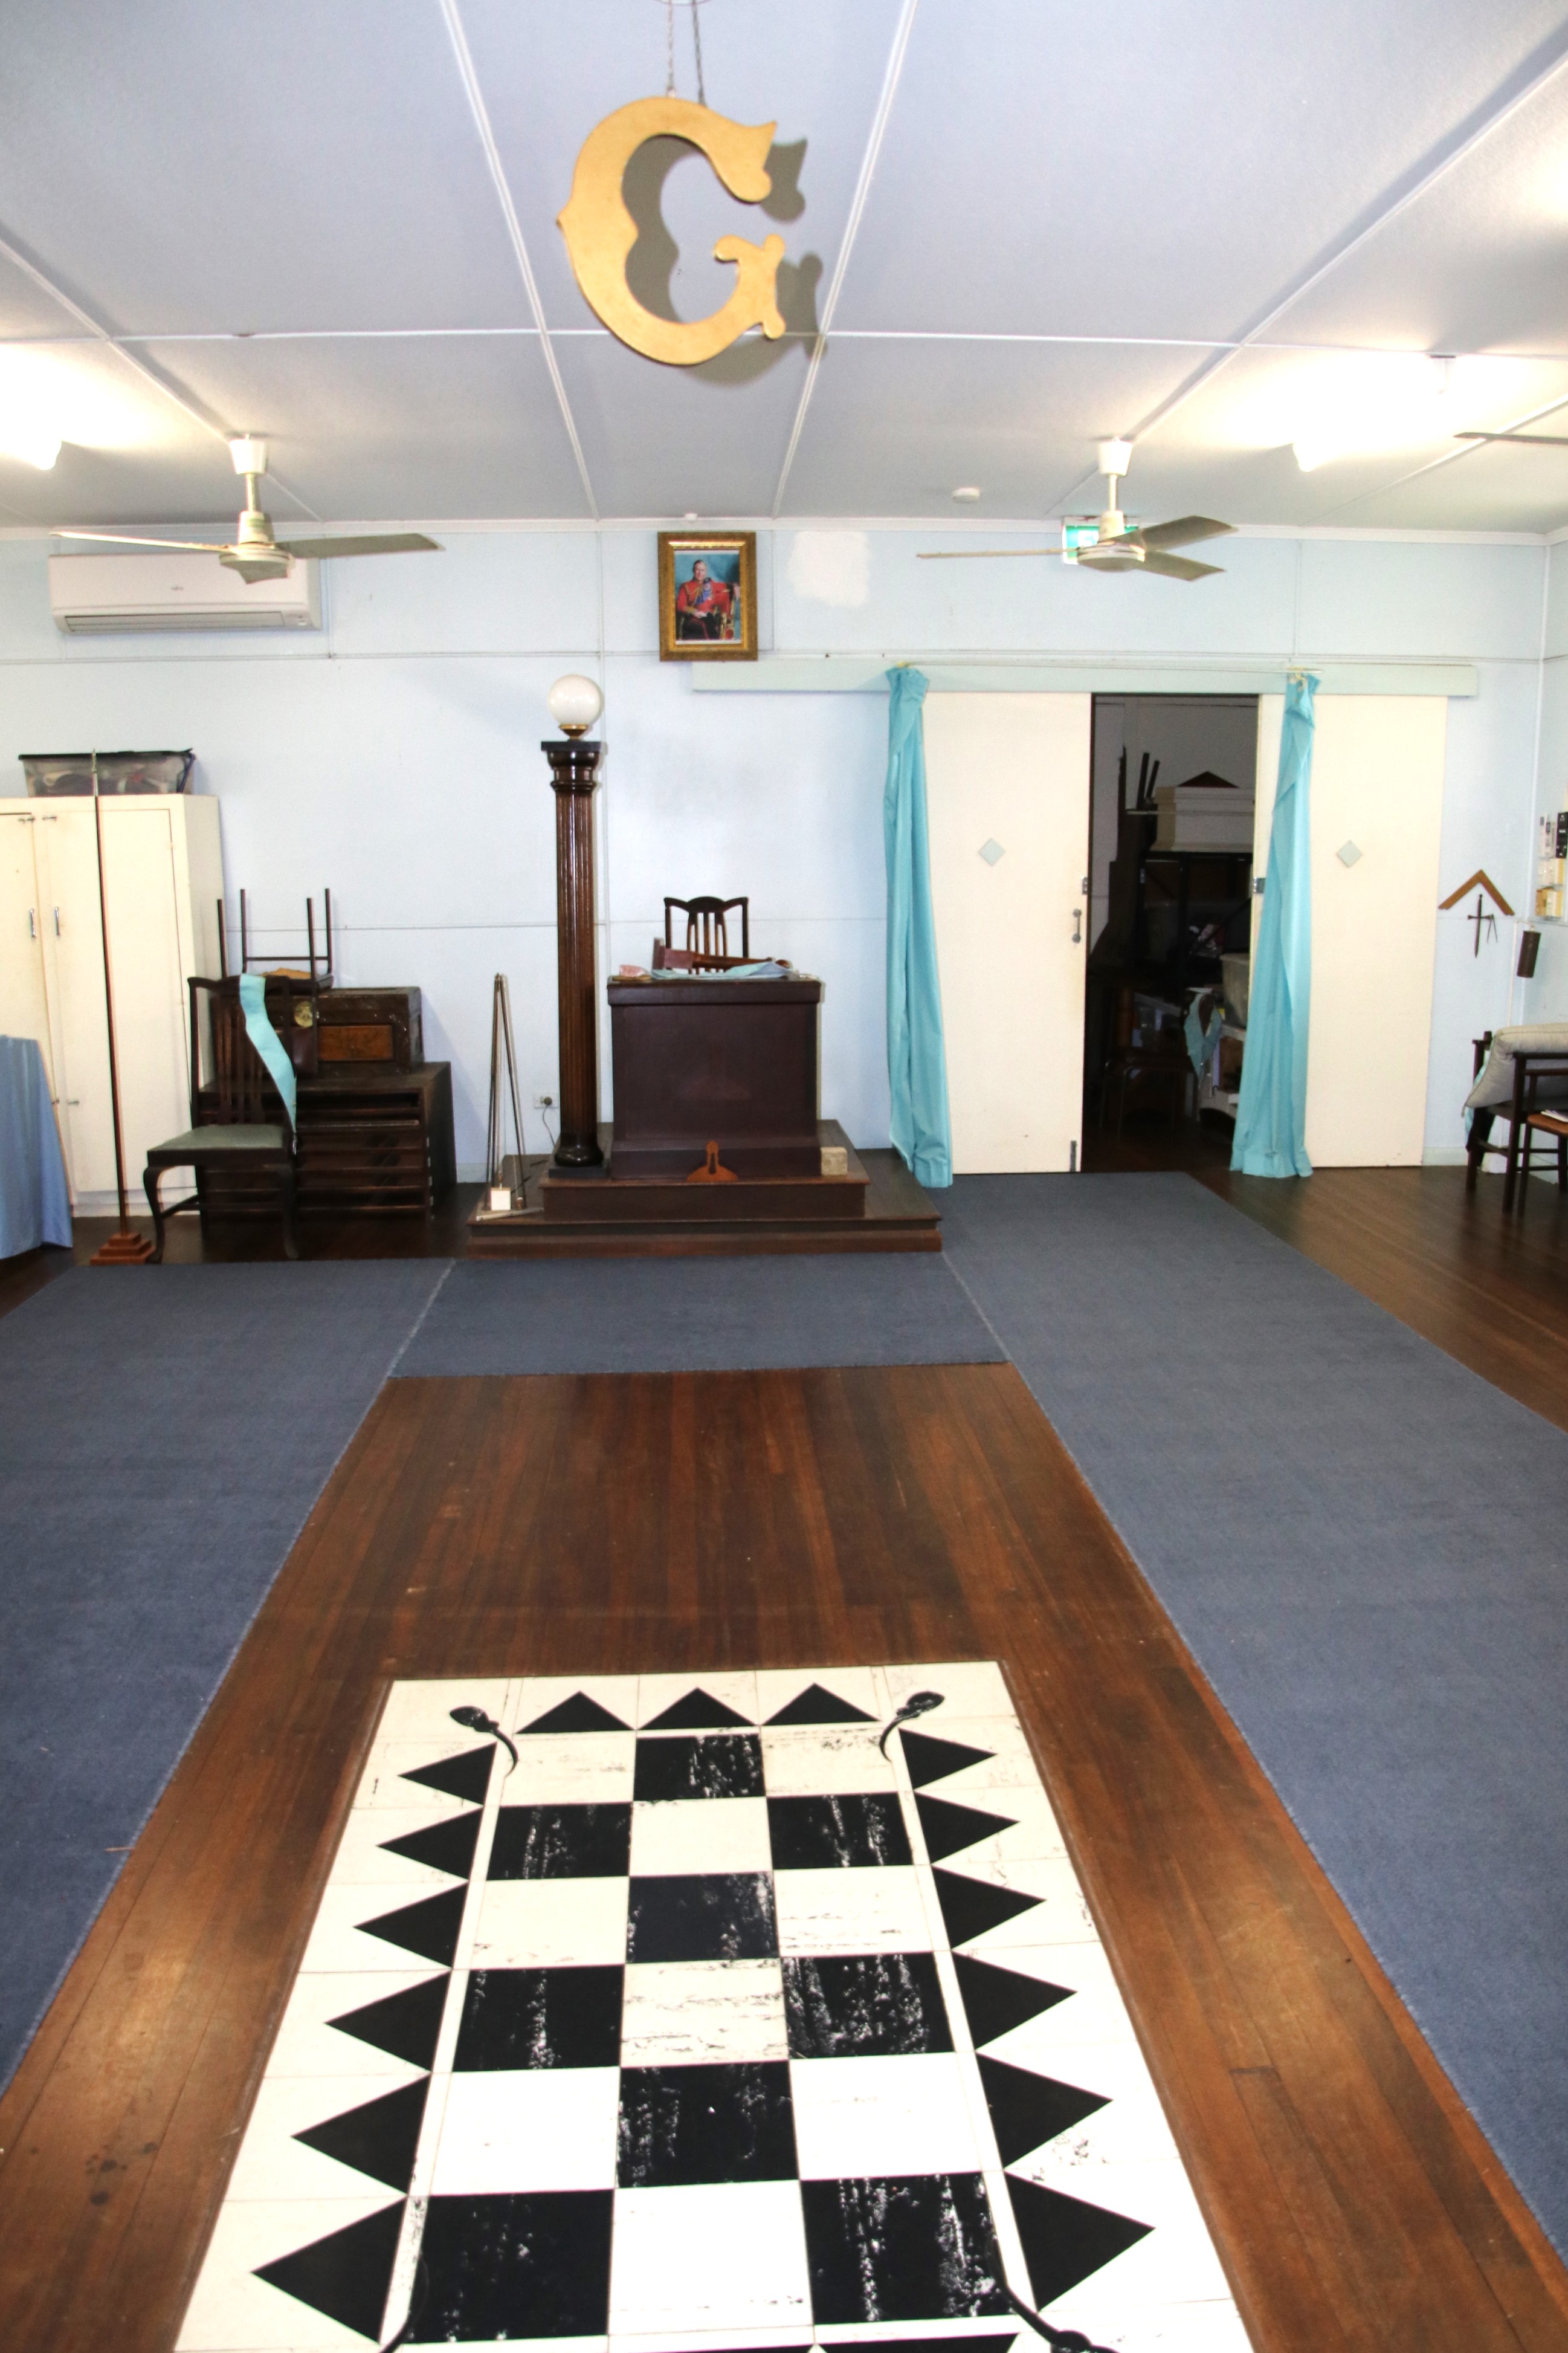 A room with a checkerboard floor and a giant G hanging from the ceiling 